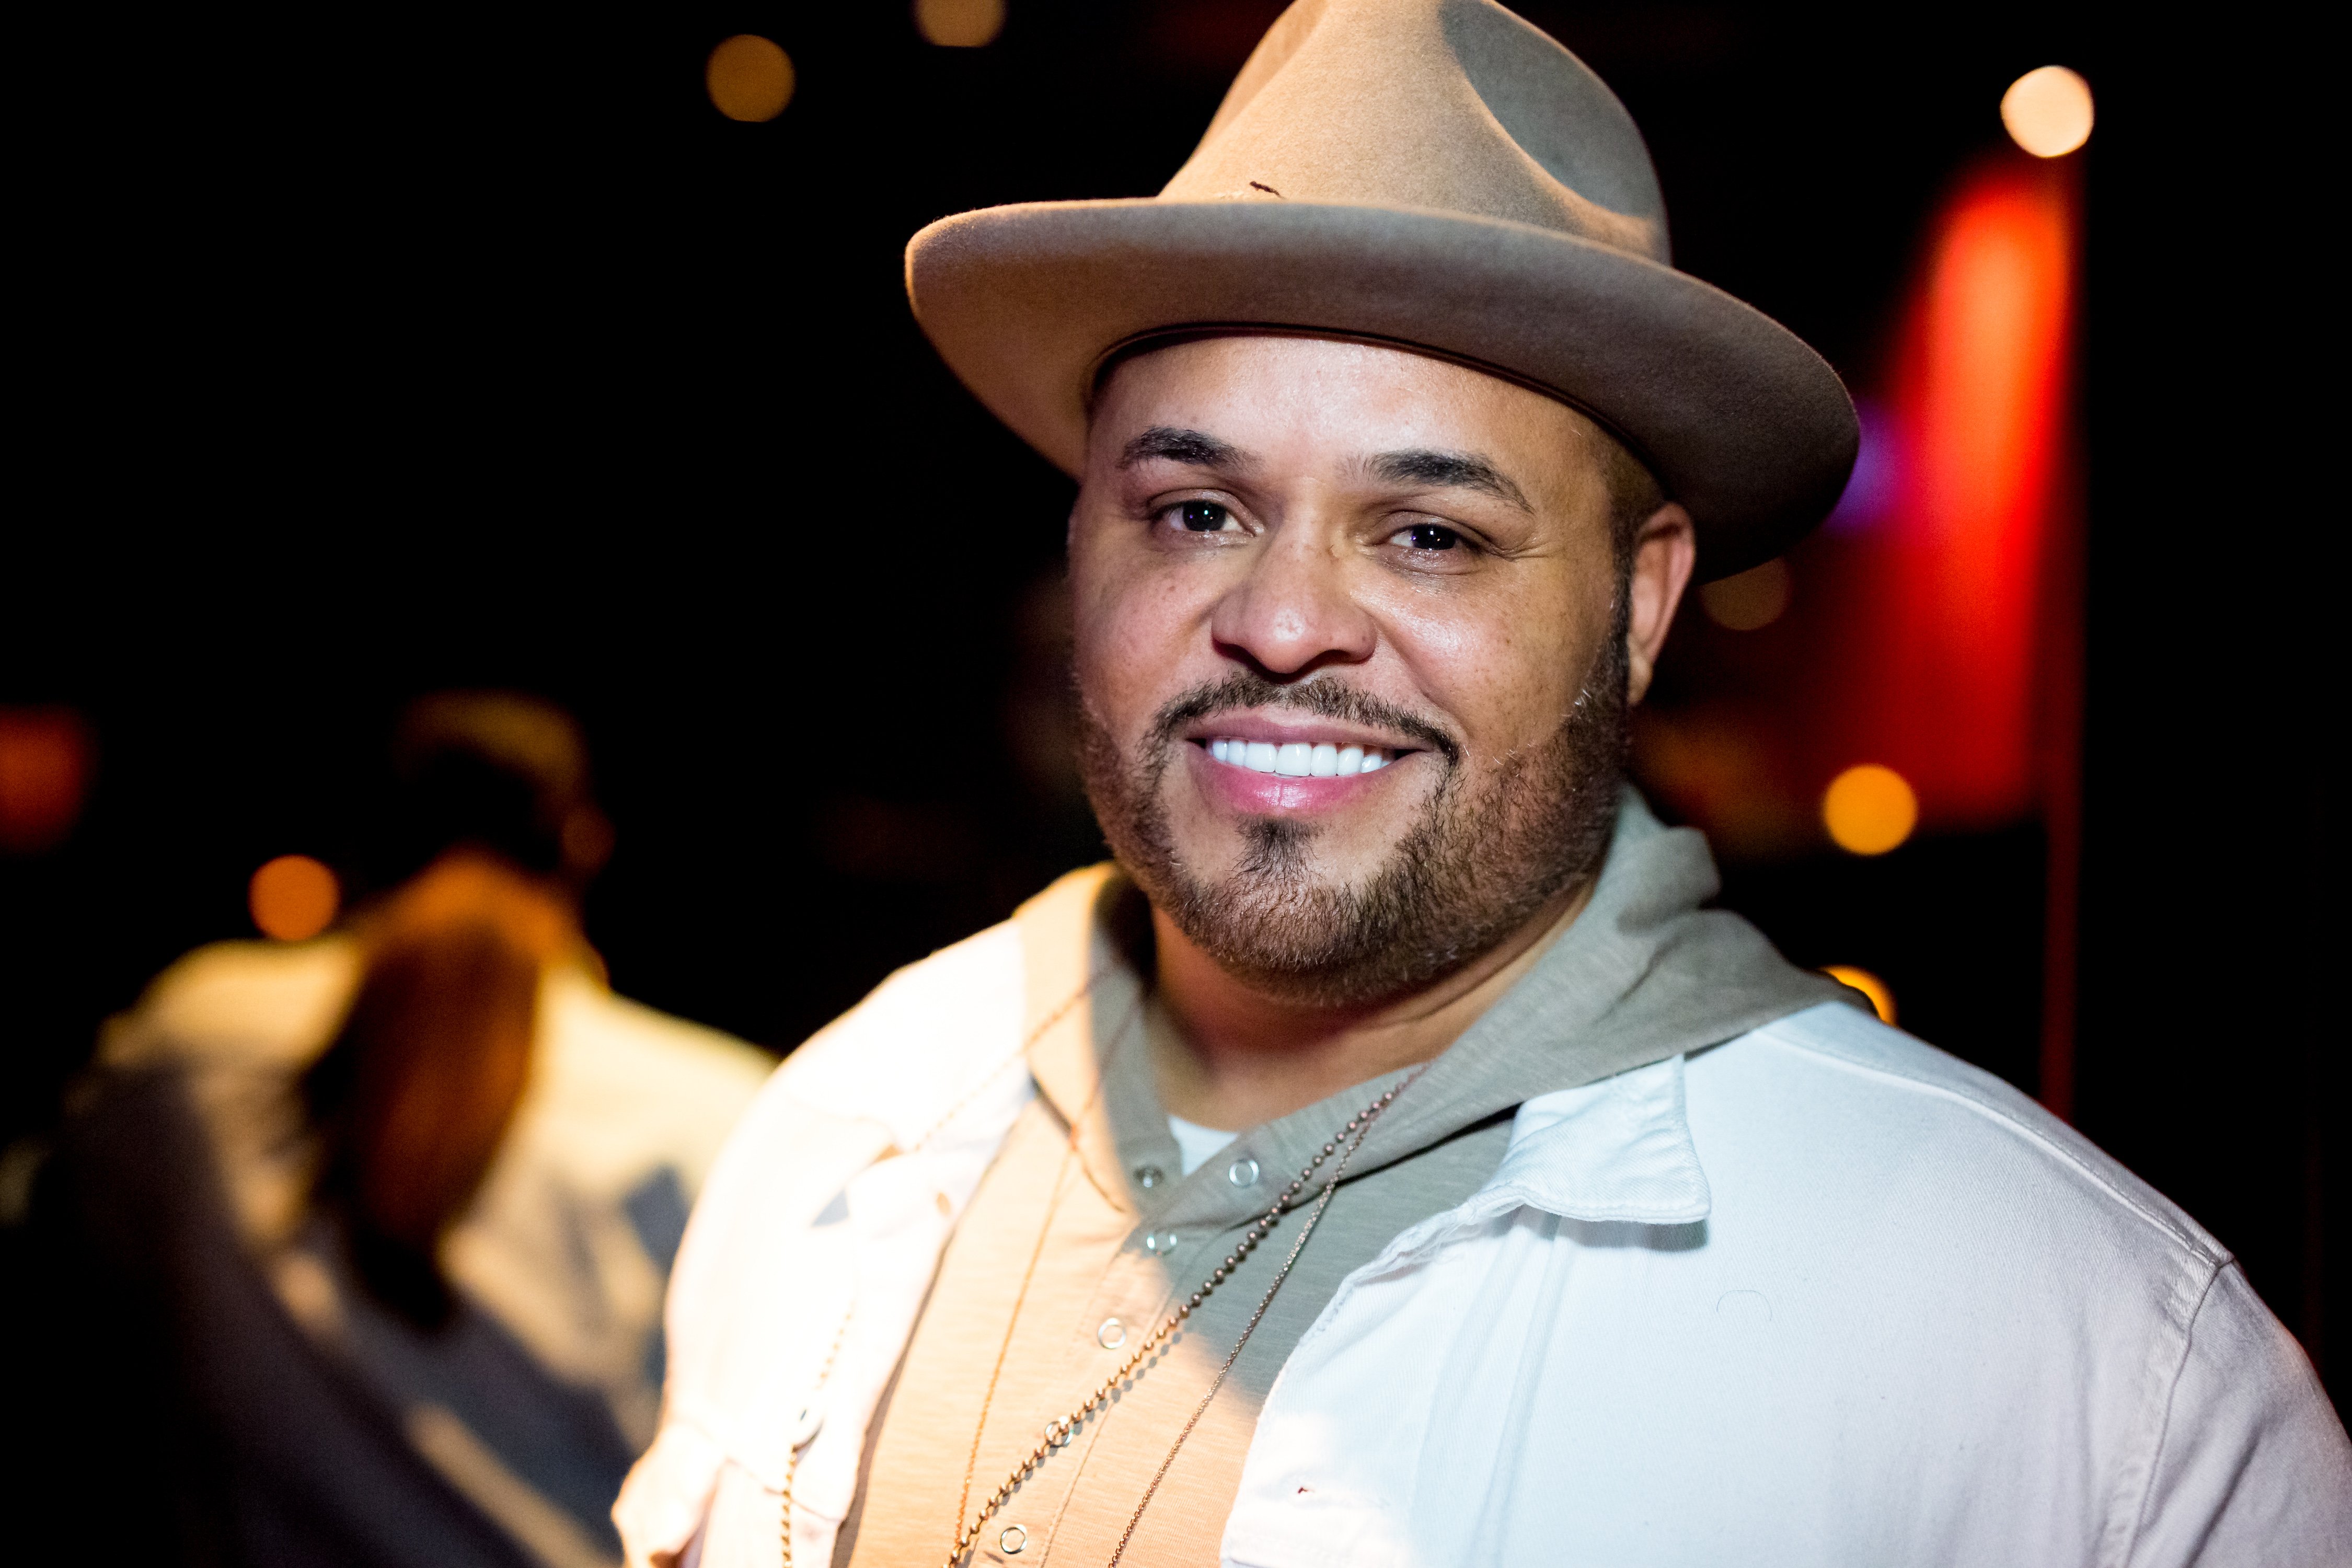 Israel Houghton at El Rey Theatre on May 1, 2018, in Los Angeles, California. | Source: Getty Images